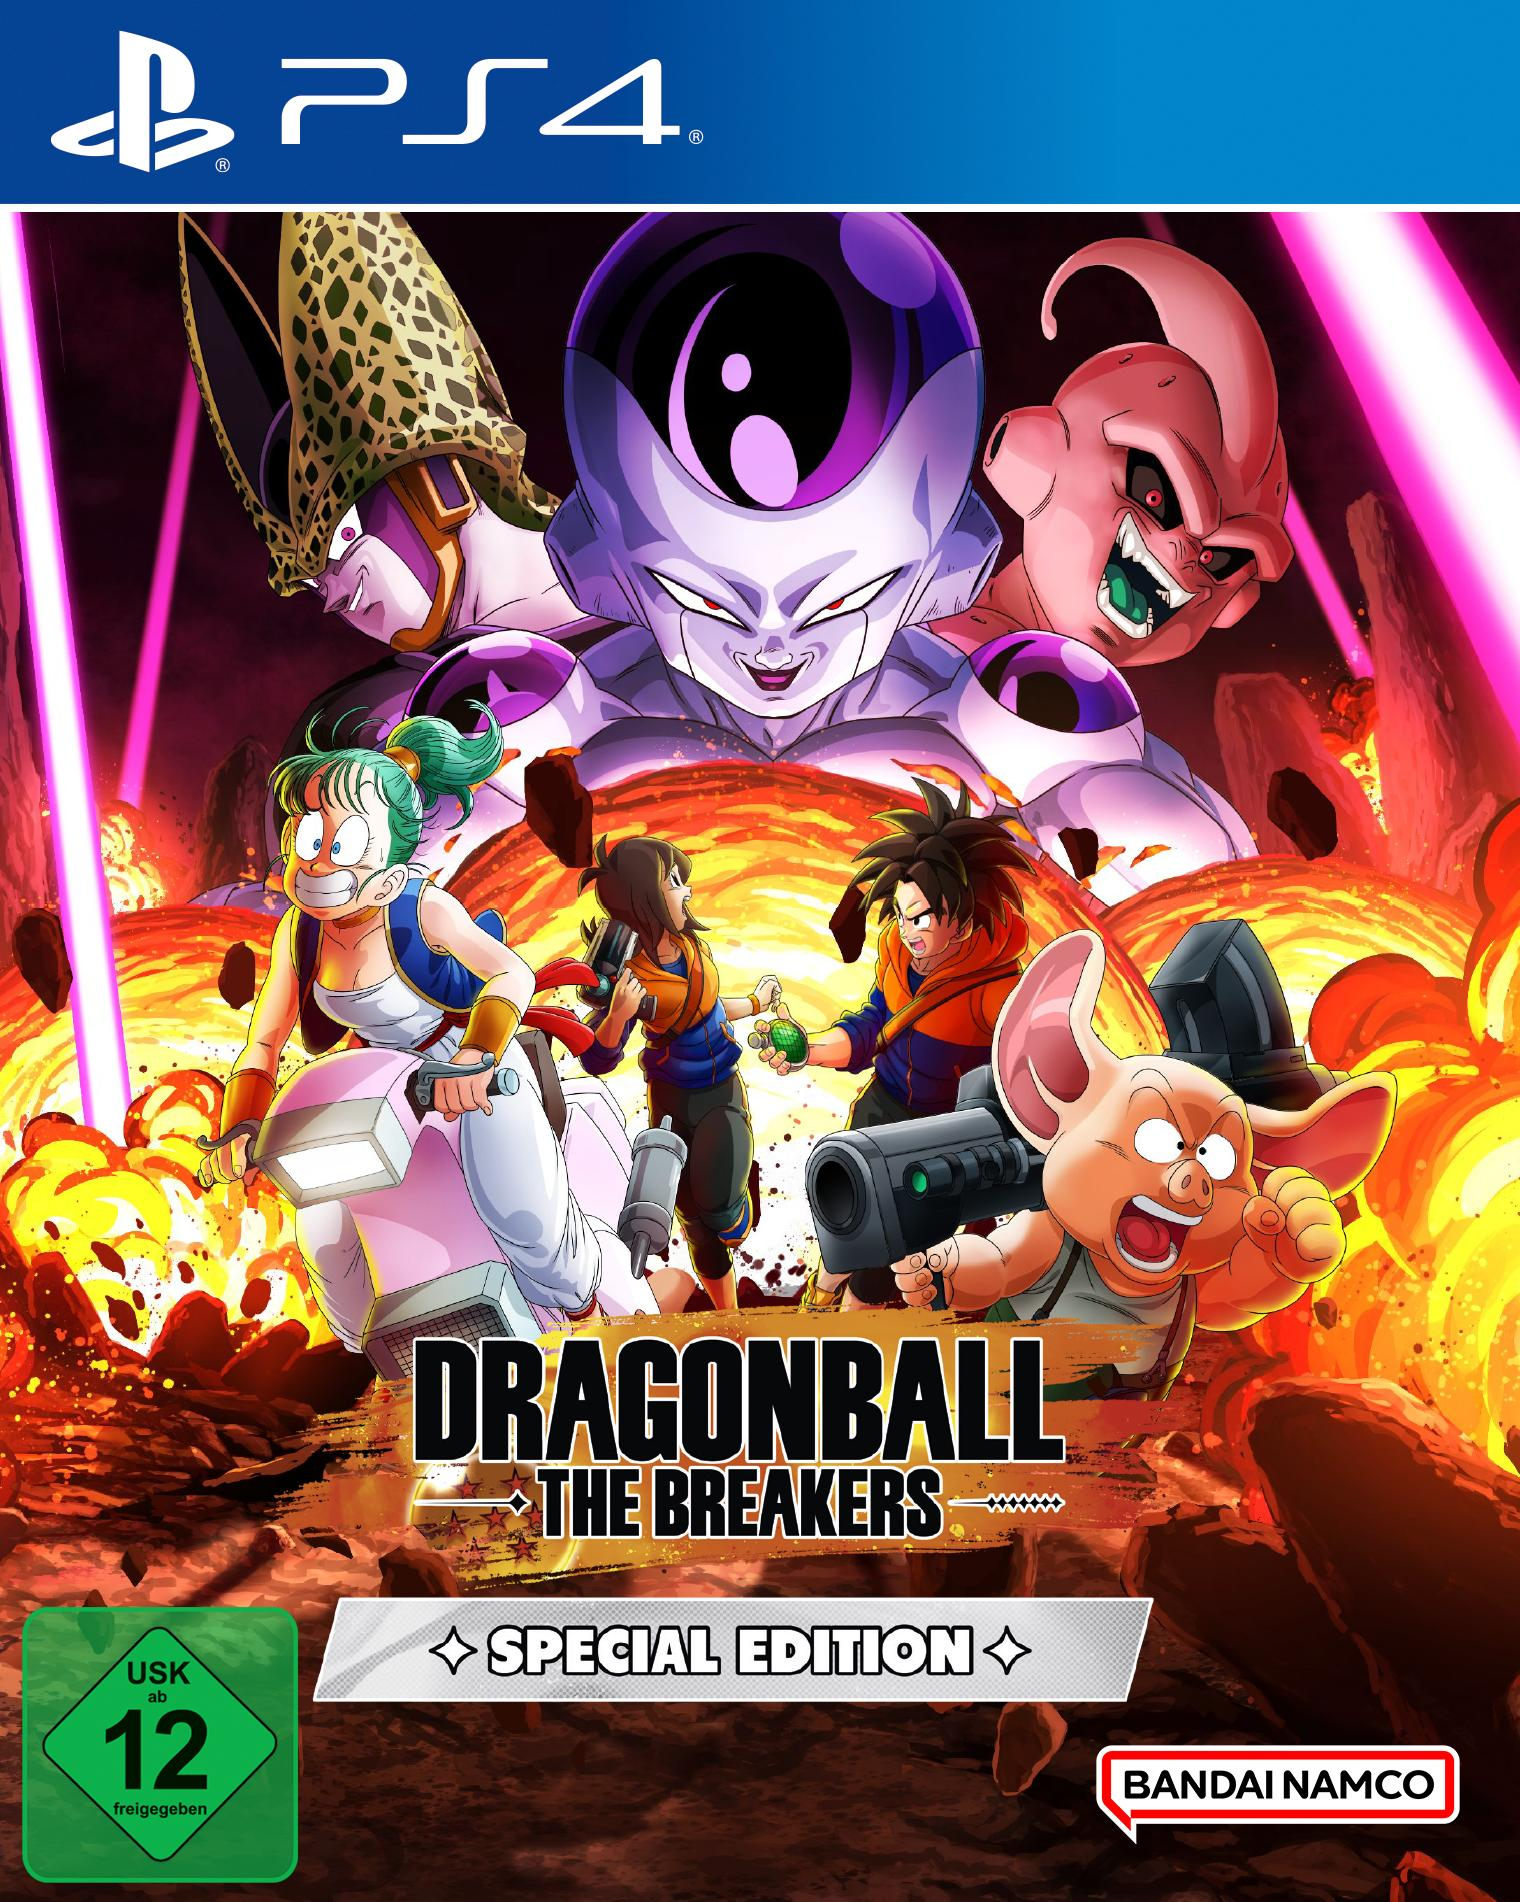 PS4 DRAGON BALL: THE 4] ED) (SPECIAL - BREAKERS [PlayStation